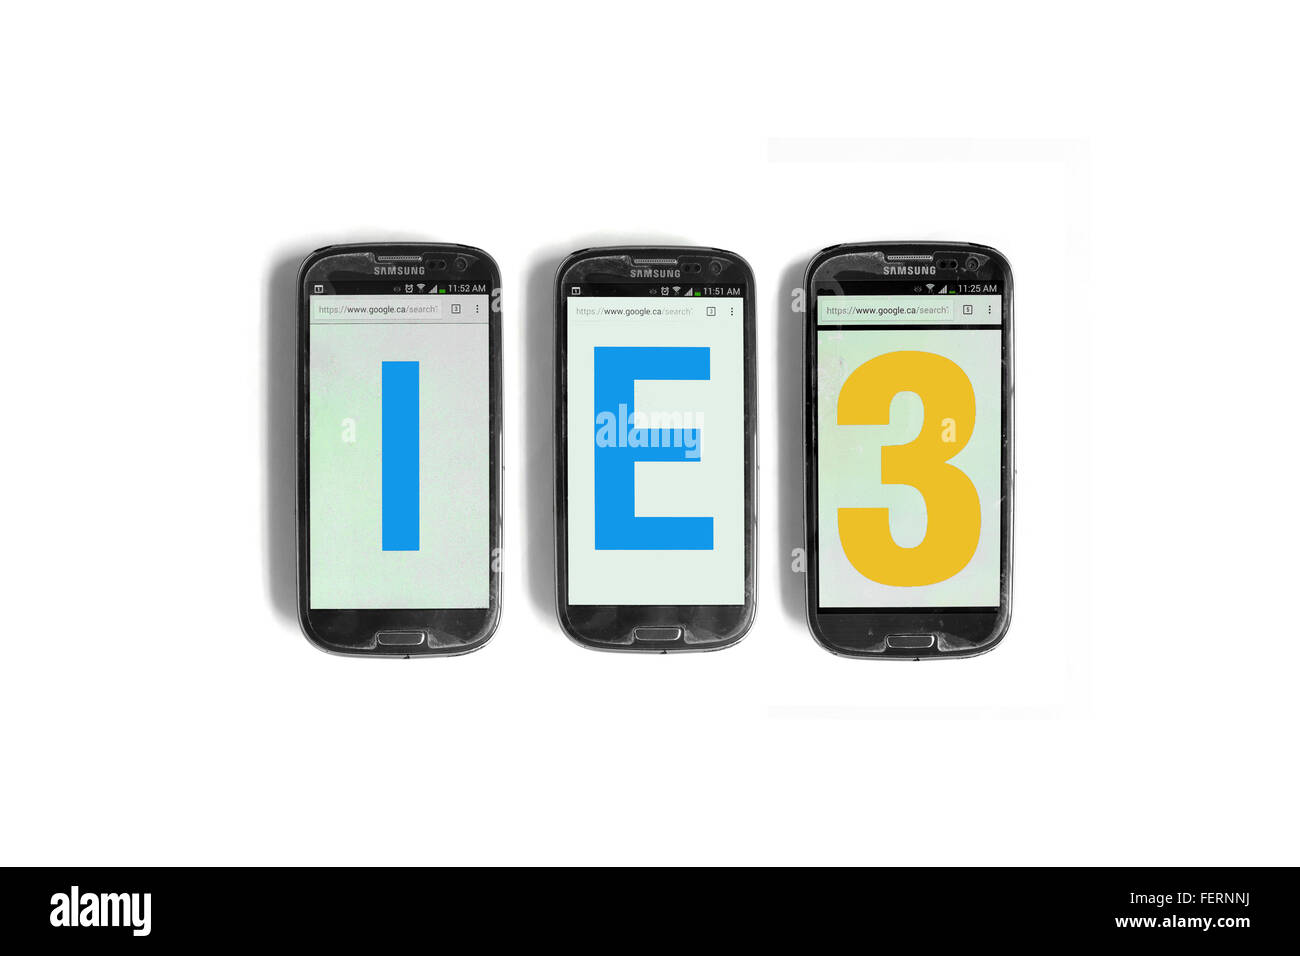 IE3 on the screens of smartphones photographed against a  white background. Stock Photo